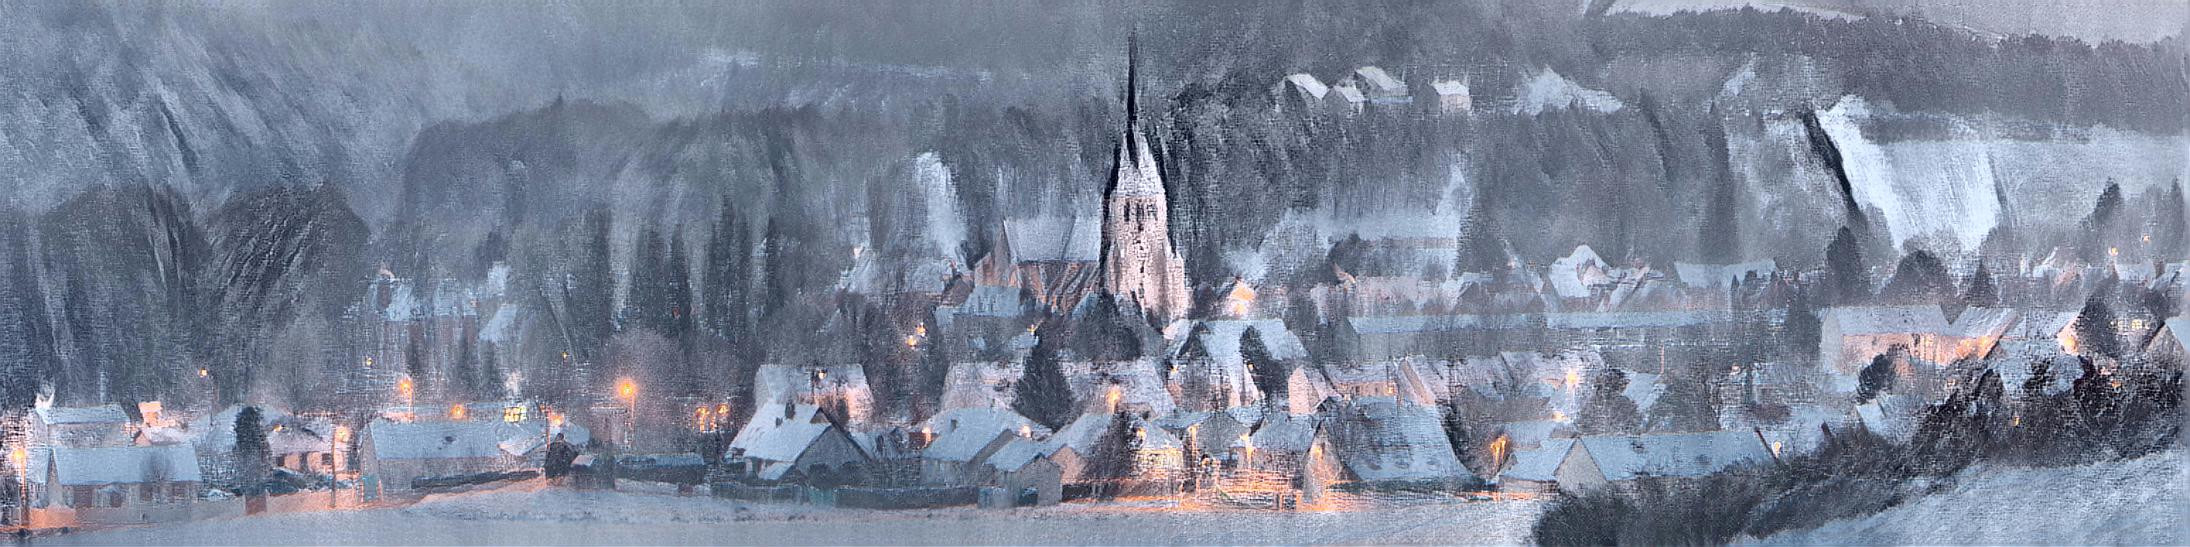 Panoramic view of the village at night